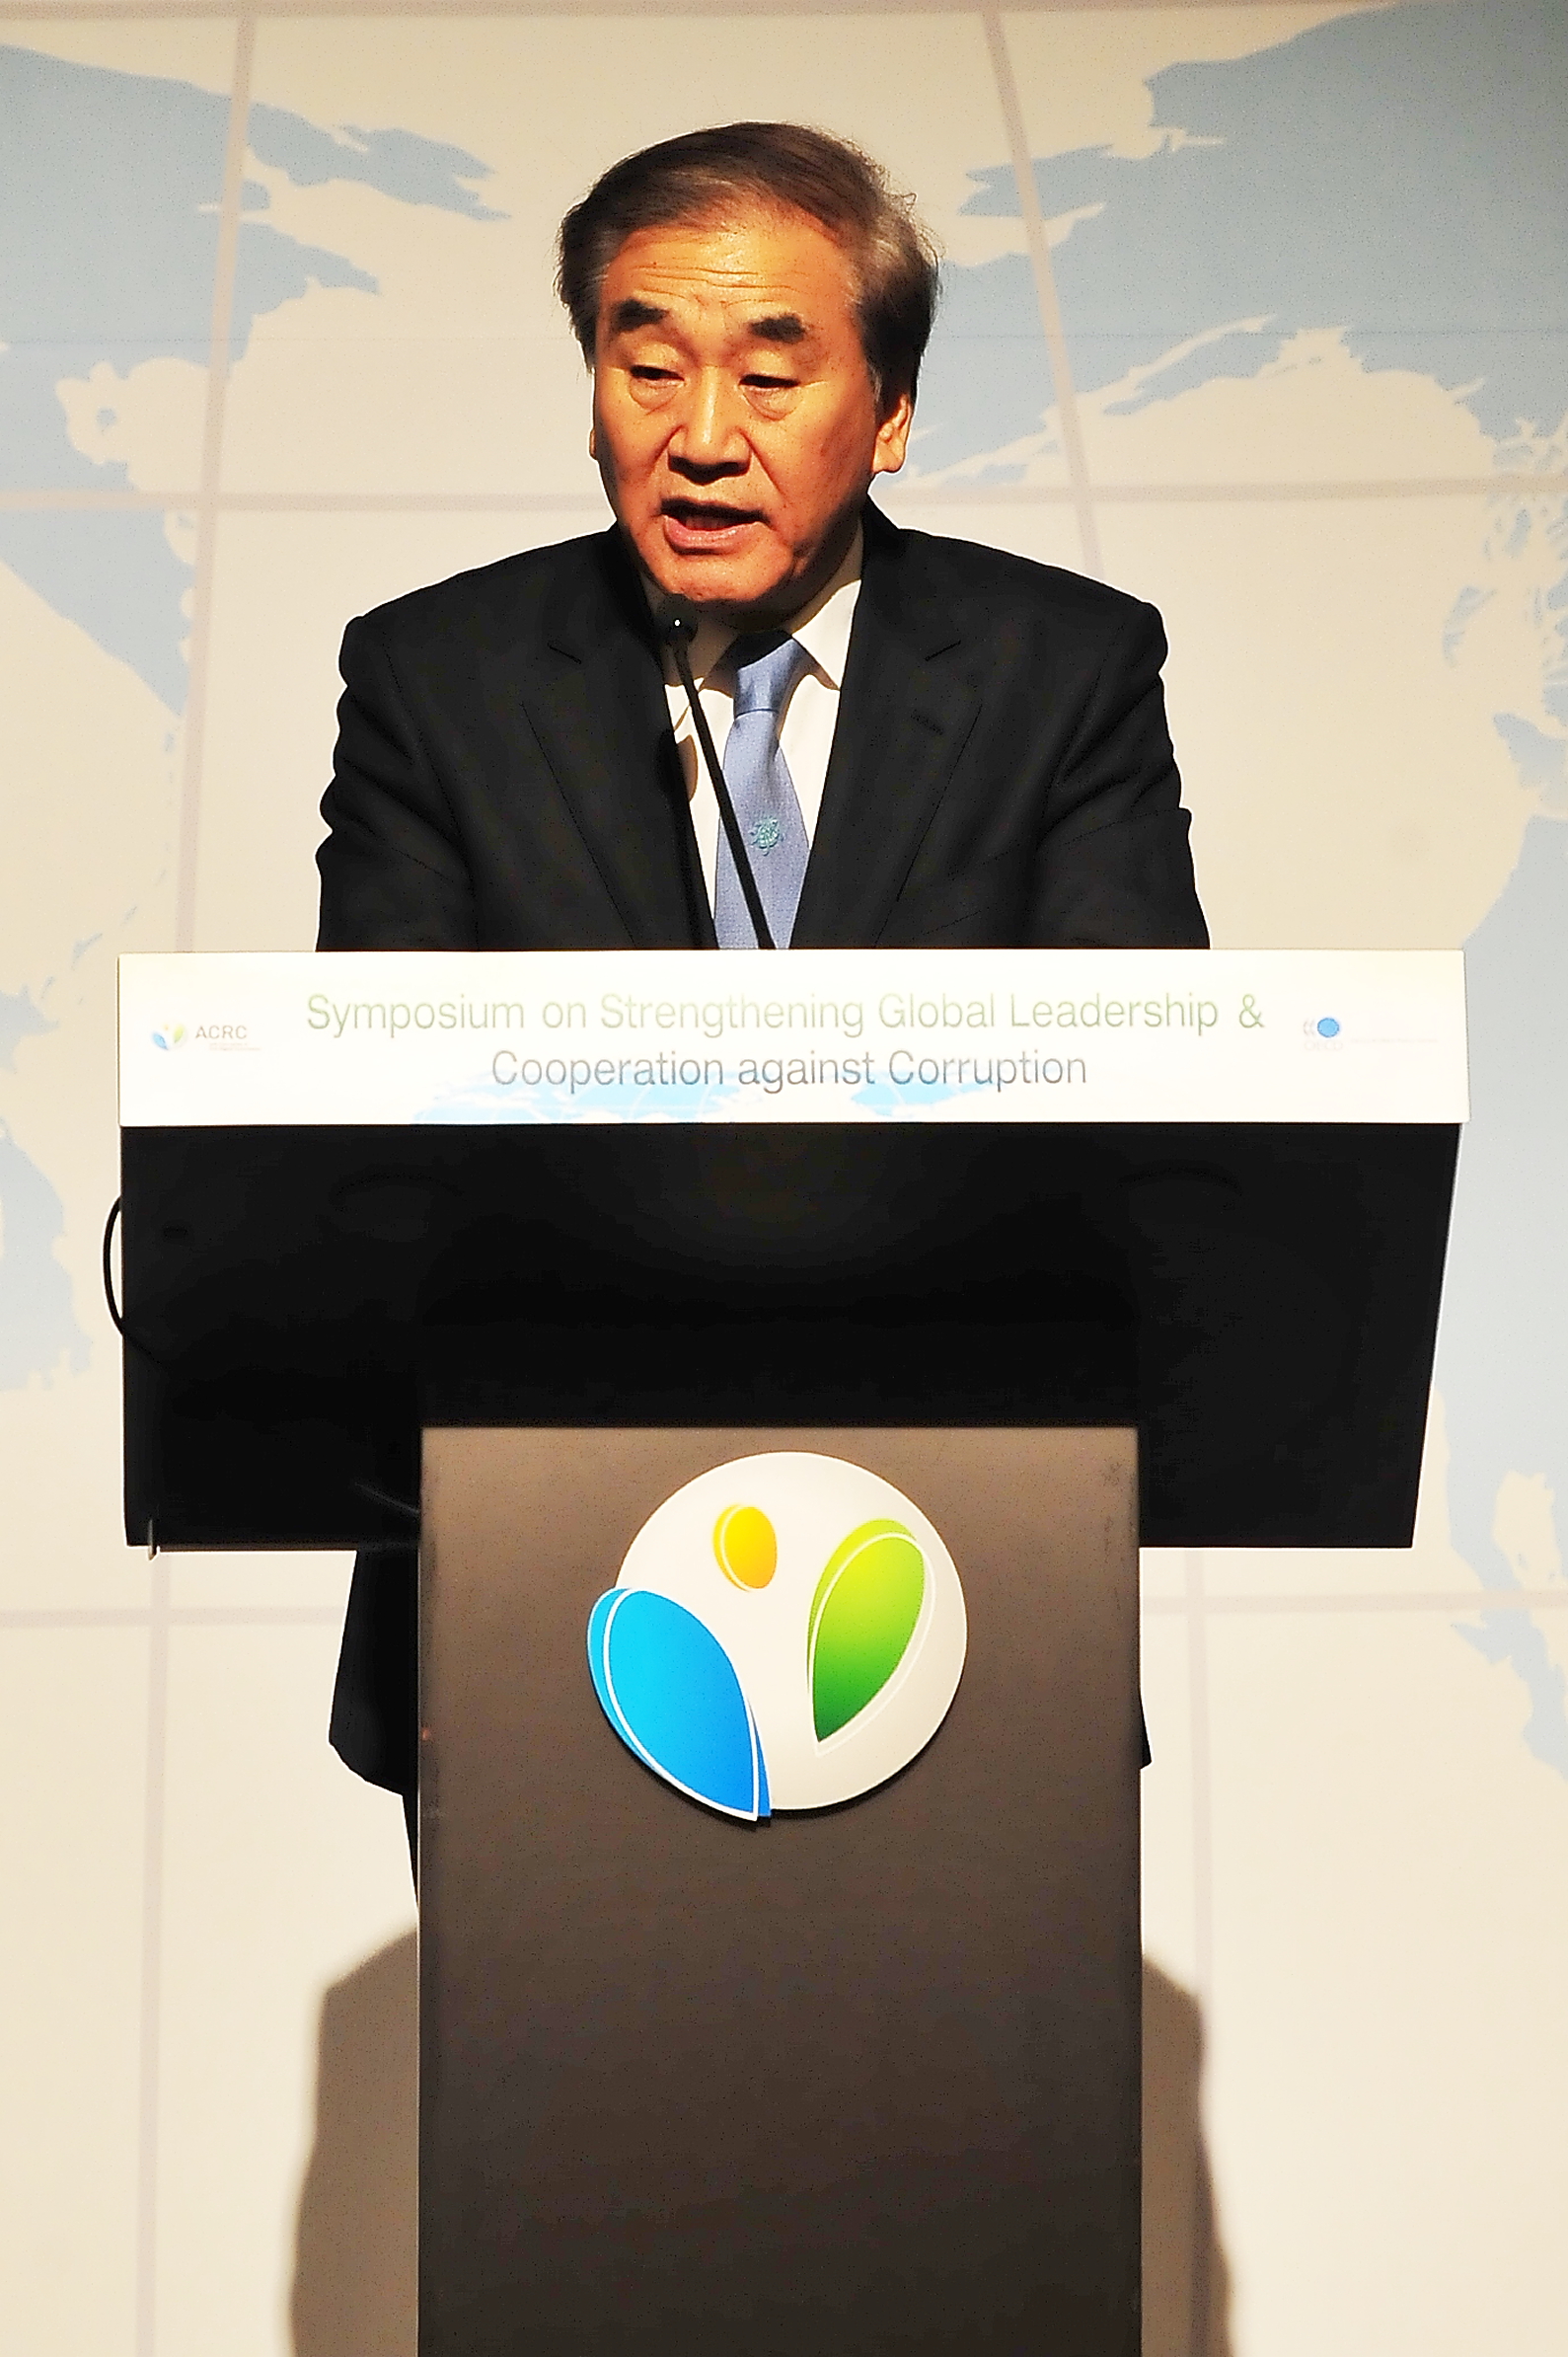 Minister Jae Oh Lee is making a keynote speech at the global anti-corruption symposium held in Seoul on 5 October.